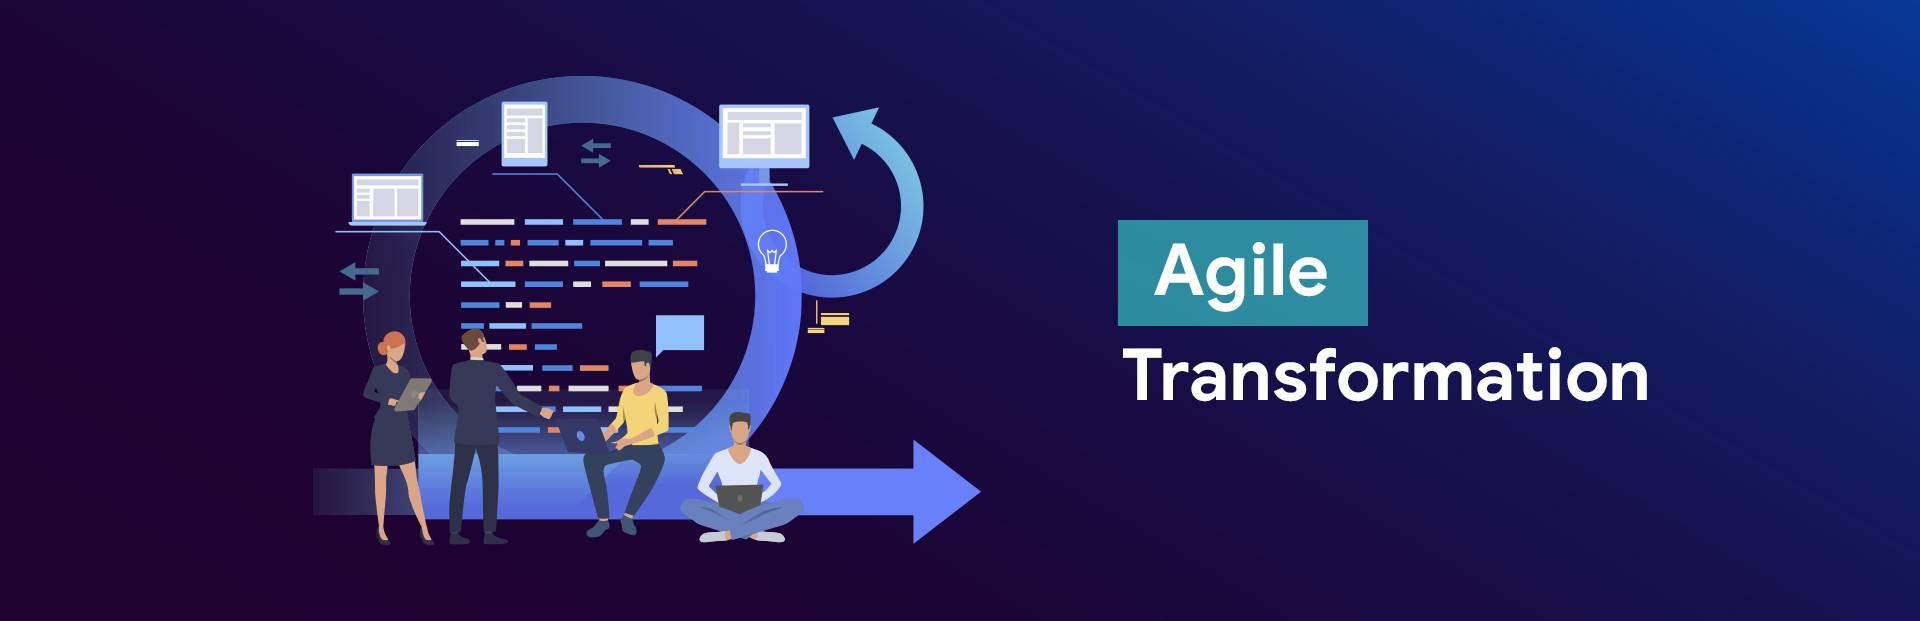 How Can Agile Transformation Help In Dealing With Complex Problems During Product Development?